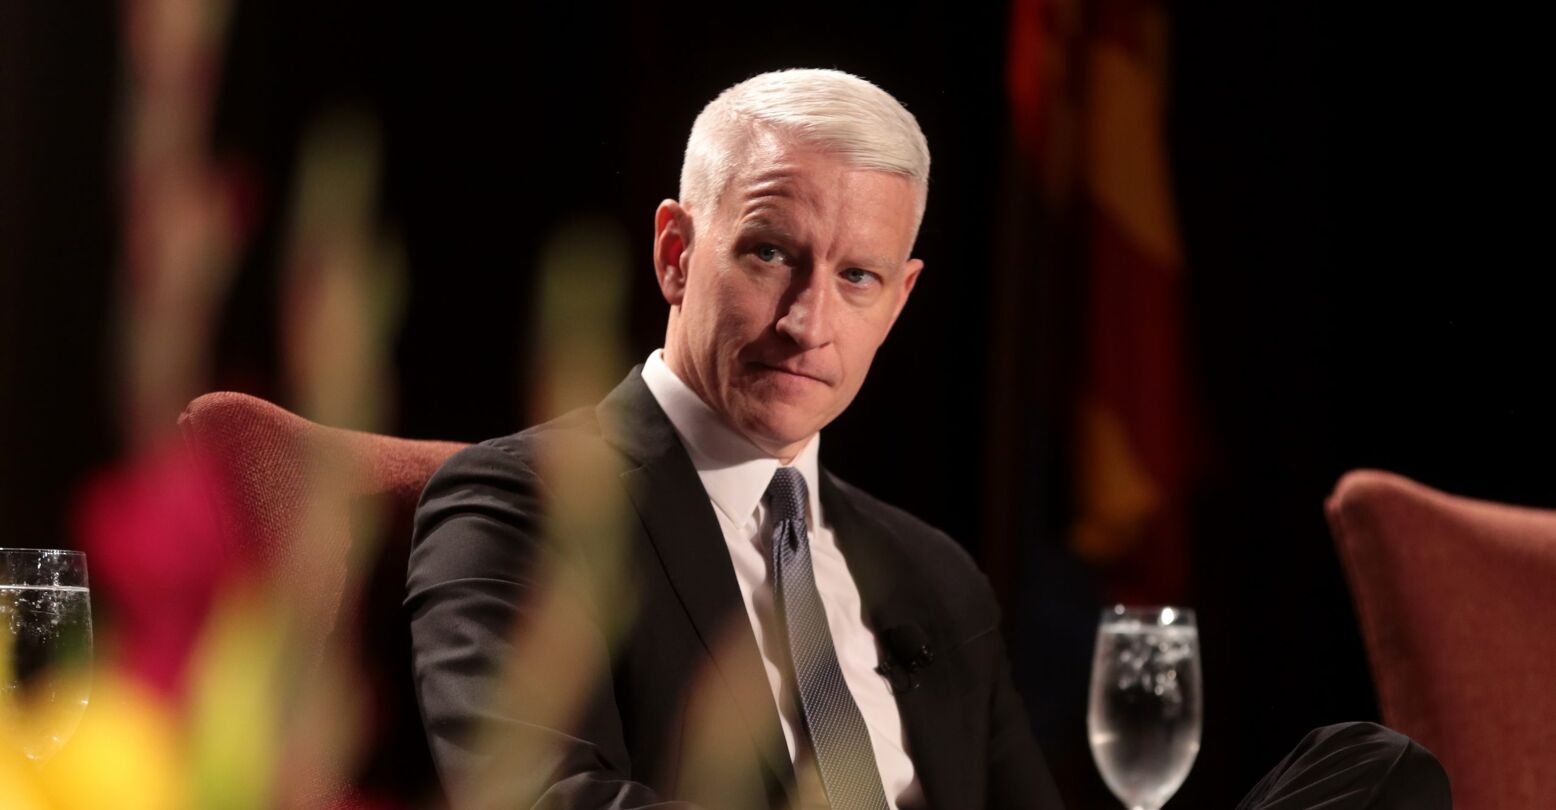 Anderson Cooper speaking with attendees at the 35th Annual Cronkite Award Luncheon at the Sheraton Grand Phoenix in Phoenix, Arizona in 2018.